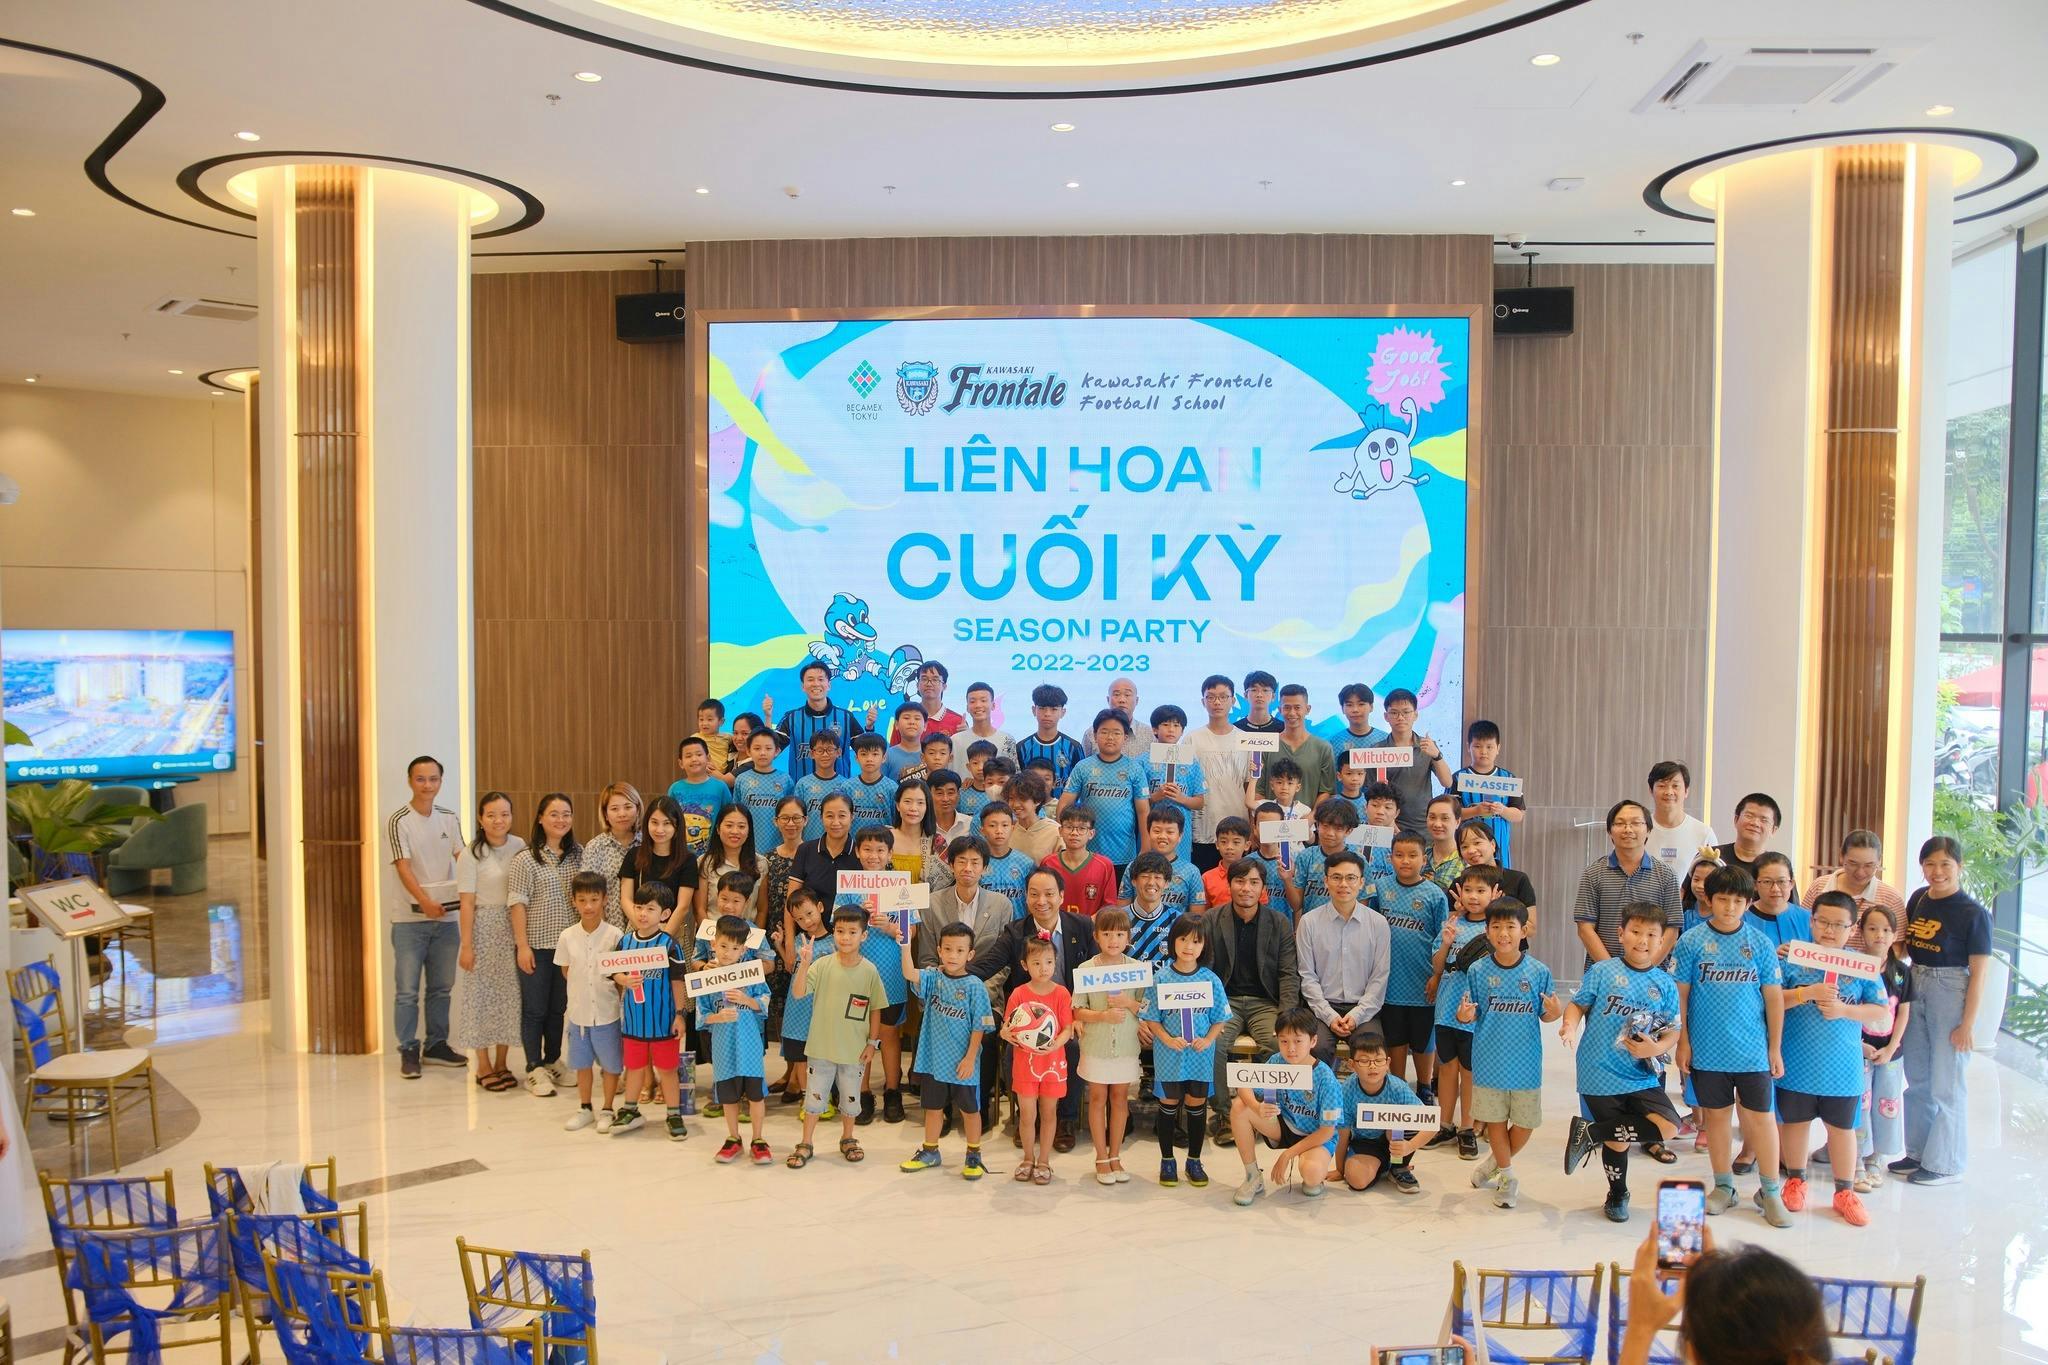 MEMORABLE MOMENTS AT THE YEAR-END FESTIVAL 2022-2023 OF KAWASAKI FRONTALE FOOTBALL SCHOOL